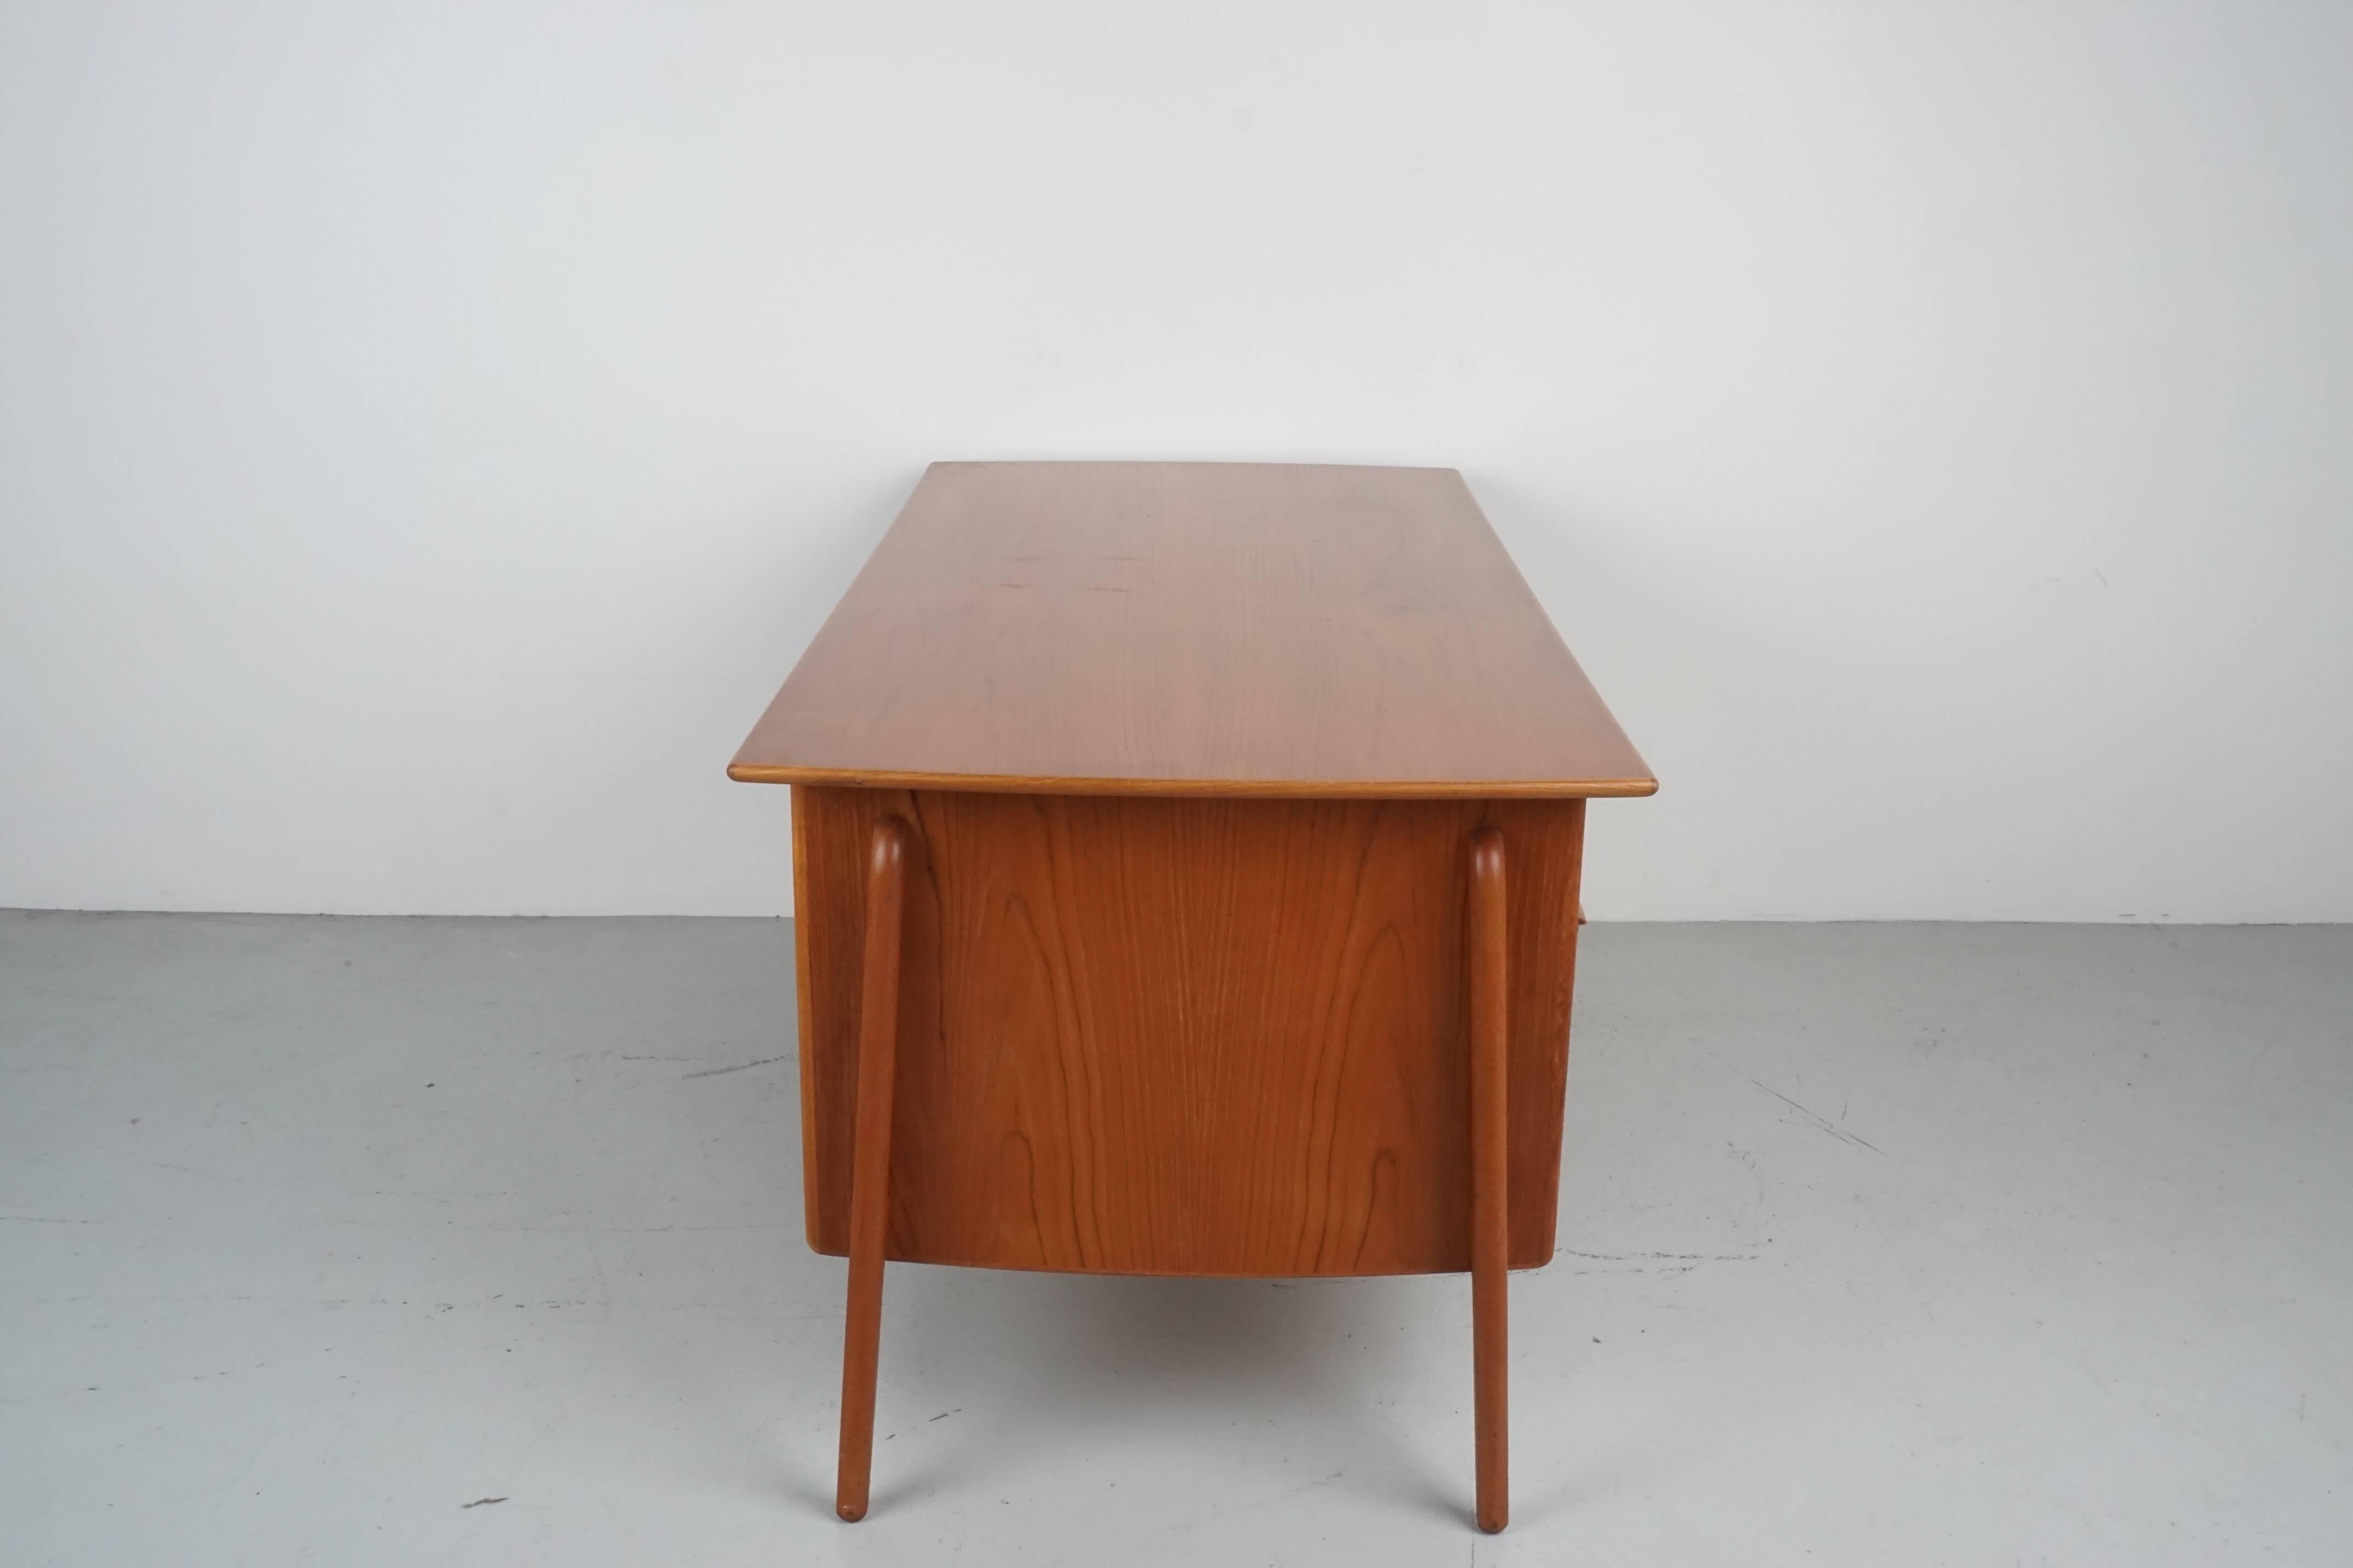 Teak desk designed by architect Svend Aage Madsen for Sigurd Hansen Mobelfabrik. Drop-down top drawer and file drawer on left side. Chair opening measures approximately 26 H X 22 W.